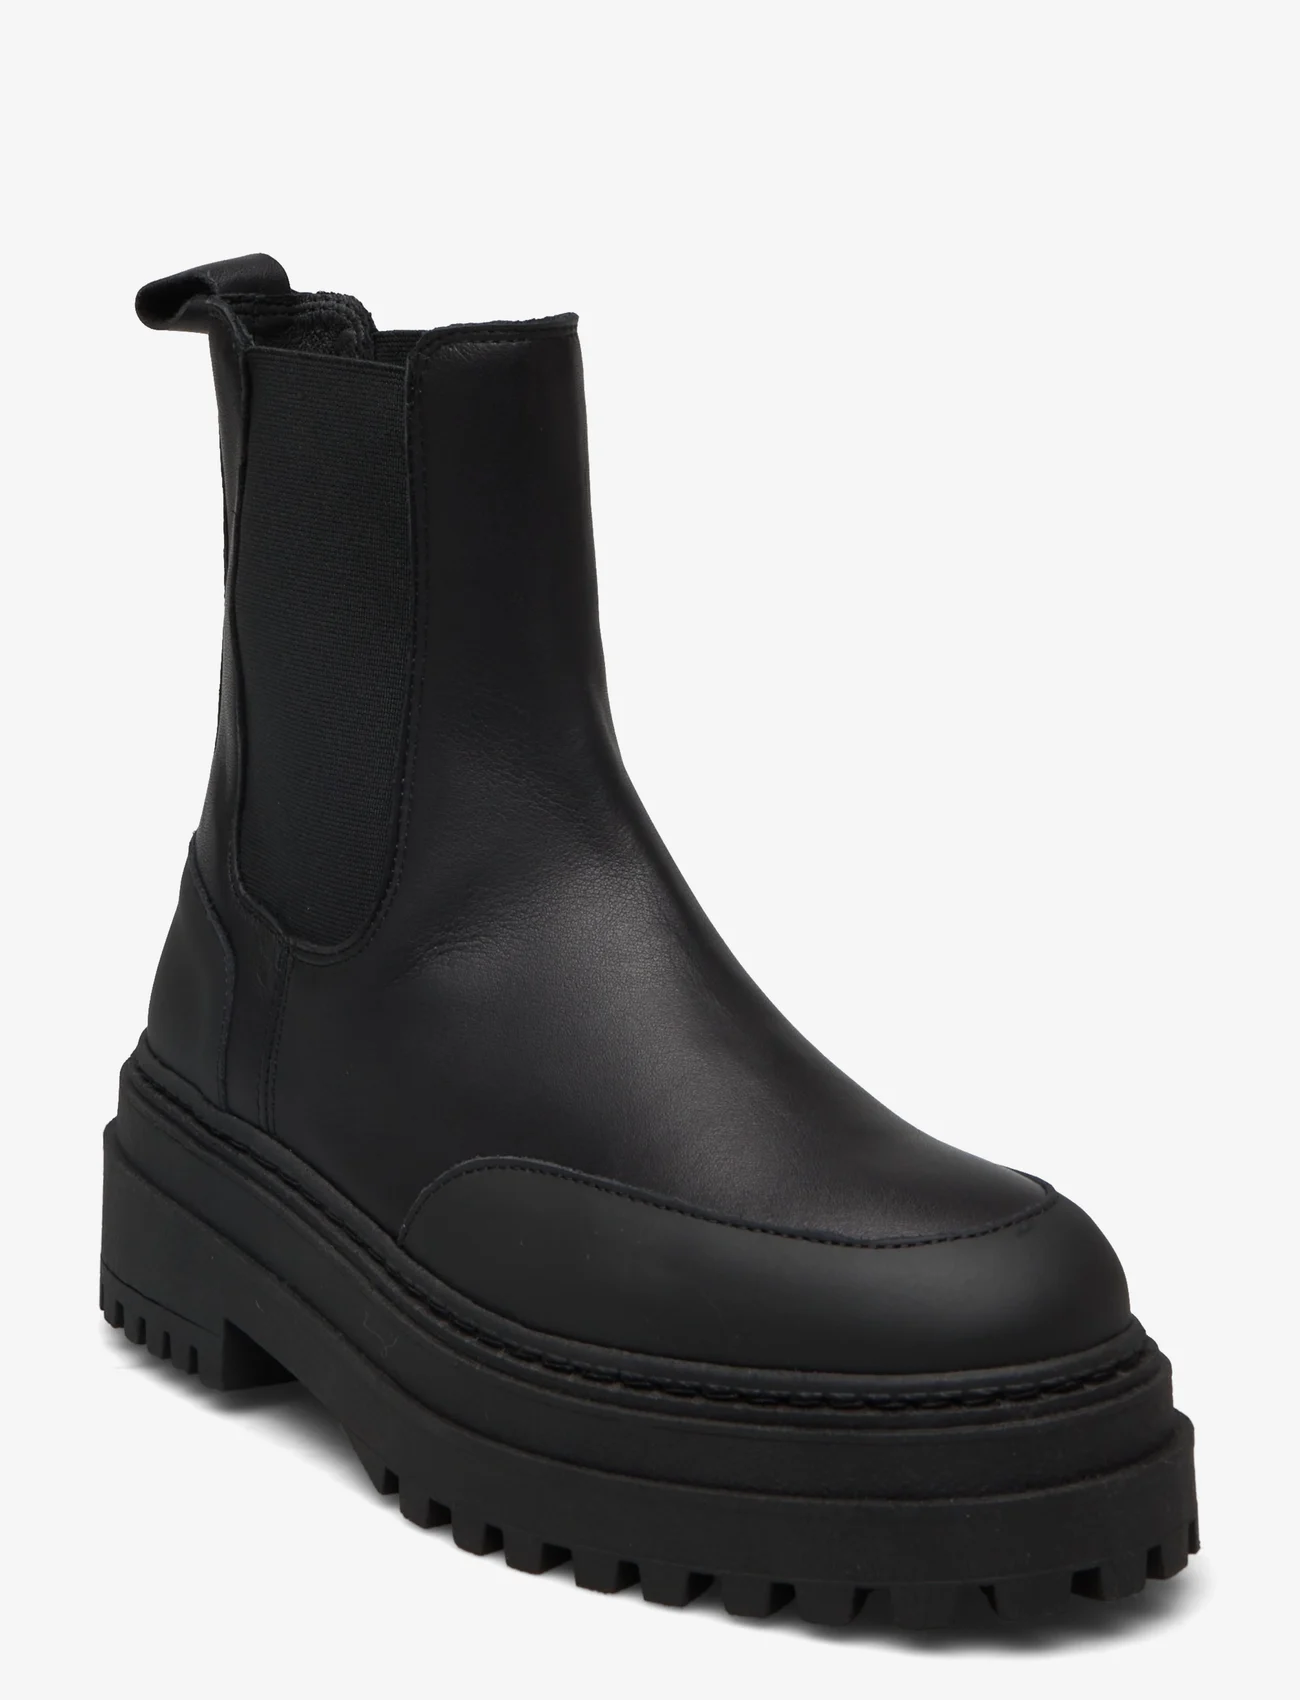 Selected Femme - SLFASTA NEW CHELSEA LEATHER BOOT B - chelsea boots - black - 0